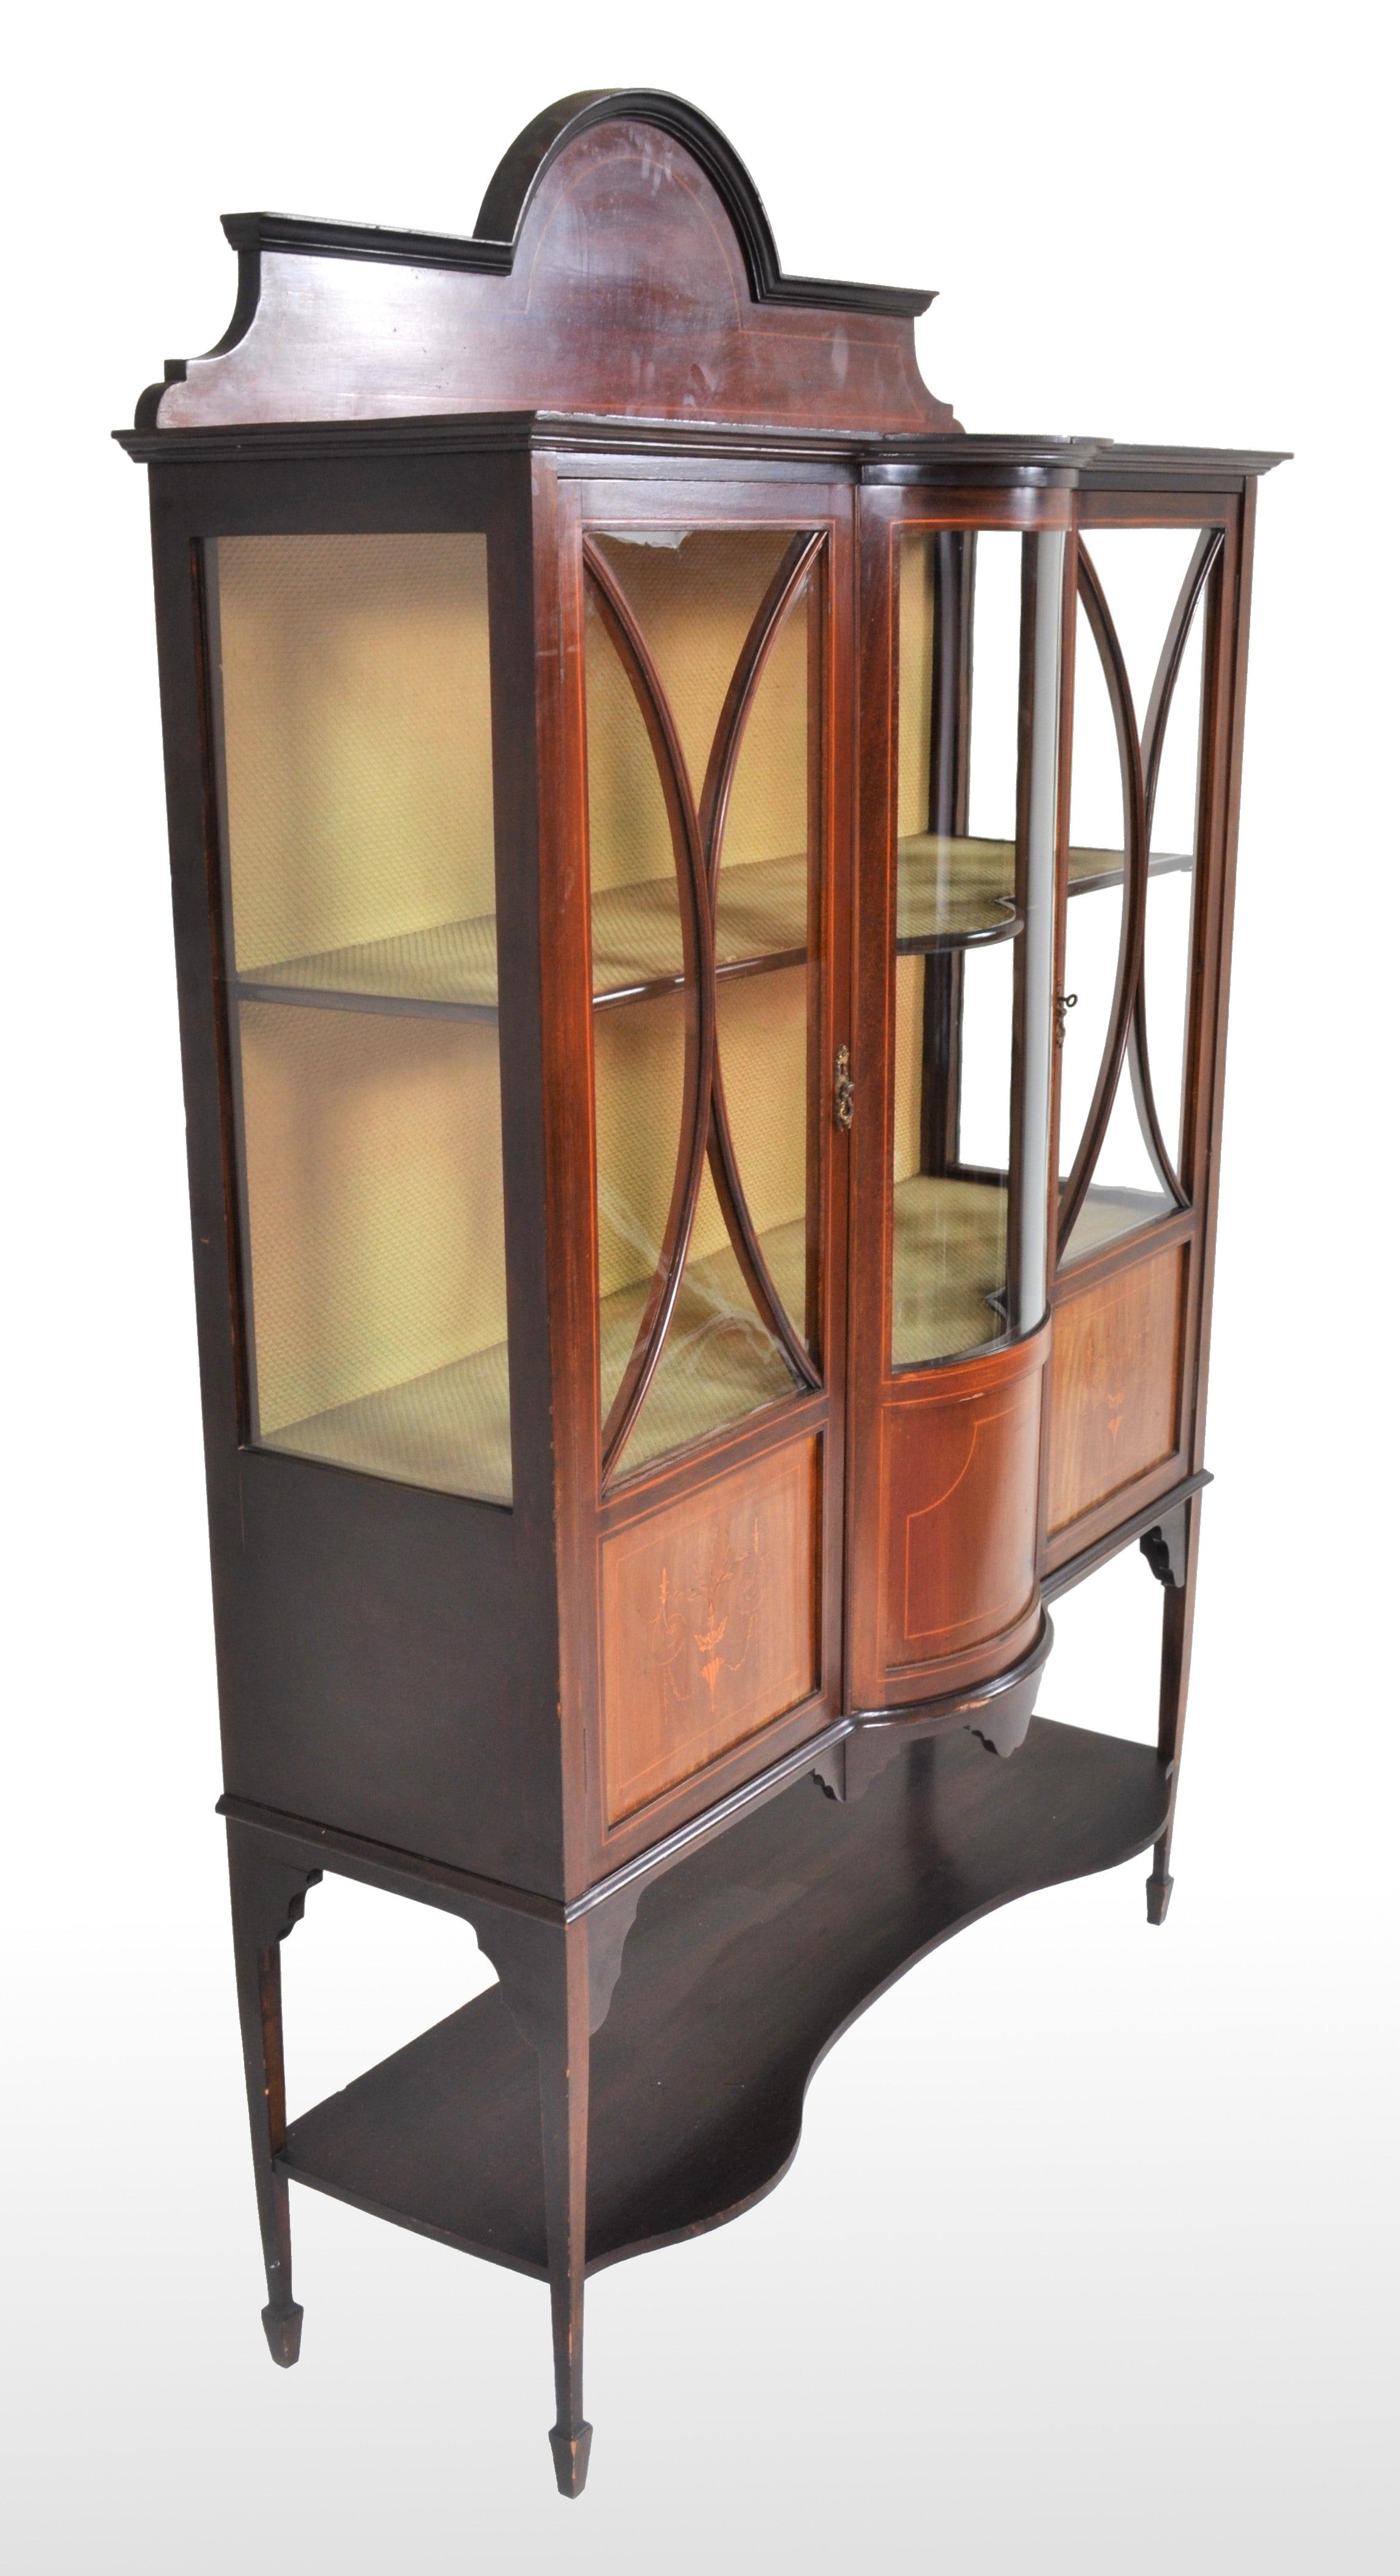 Antique English Edwardian Sheraton Revival inlaid mahogany China cabinet, Henry Barker Ltd, Nottingham circa 1895. The cabinet having an inlaid and arched gallery. Below are three doors, the central door with curved glass, each door having